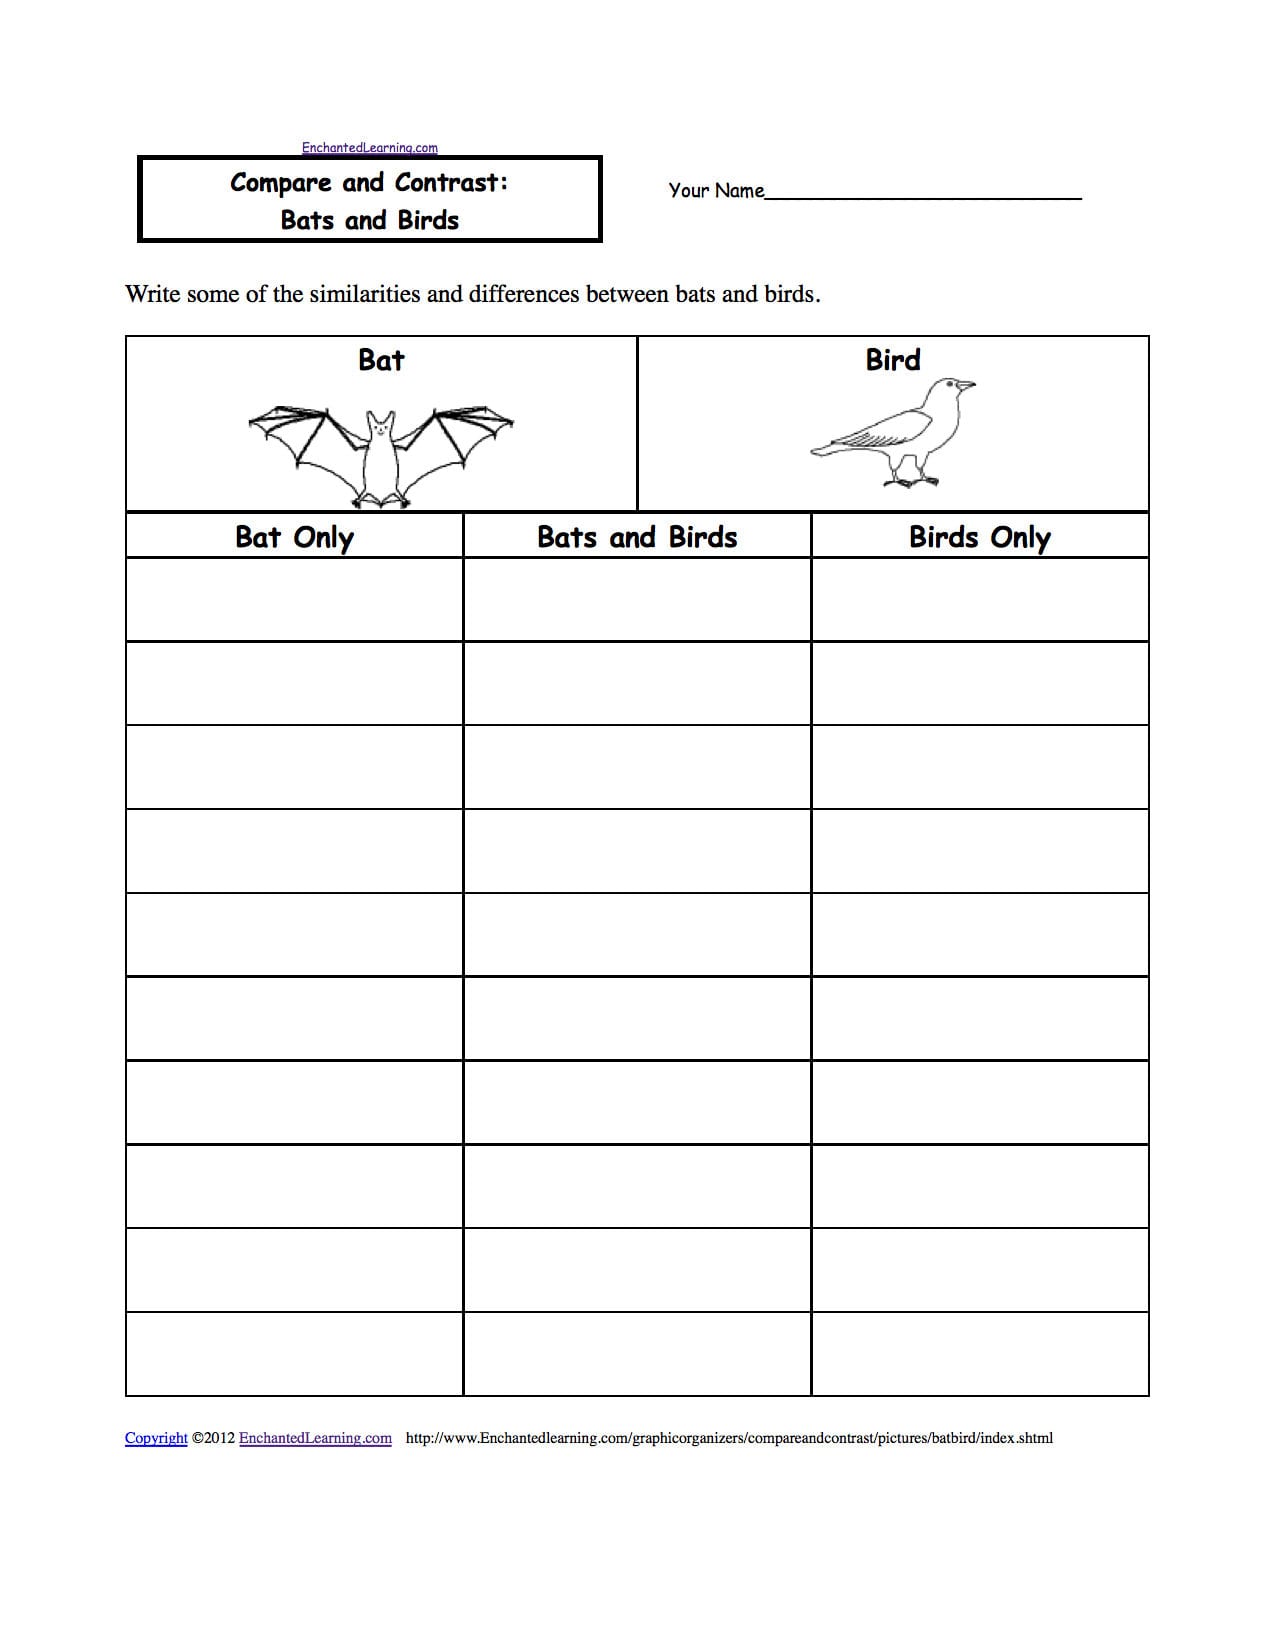 Compare And Contrast Worksheets To Print  Enchantedlearning Throughout Free Compare And Contrast Worksheets For Kindergarten